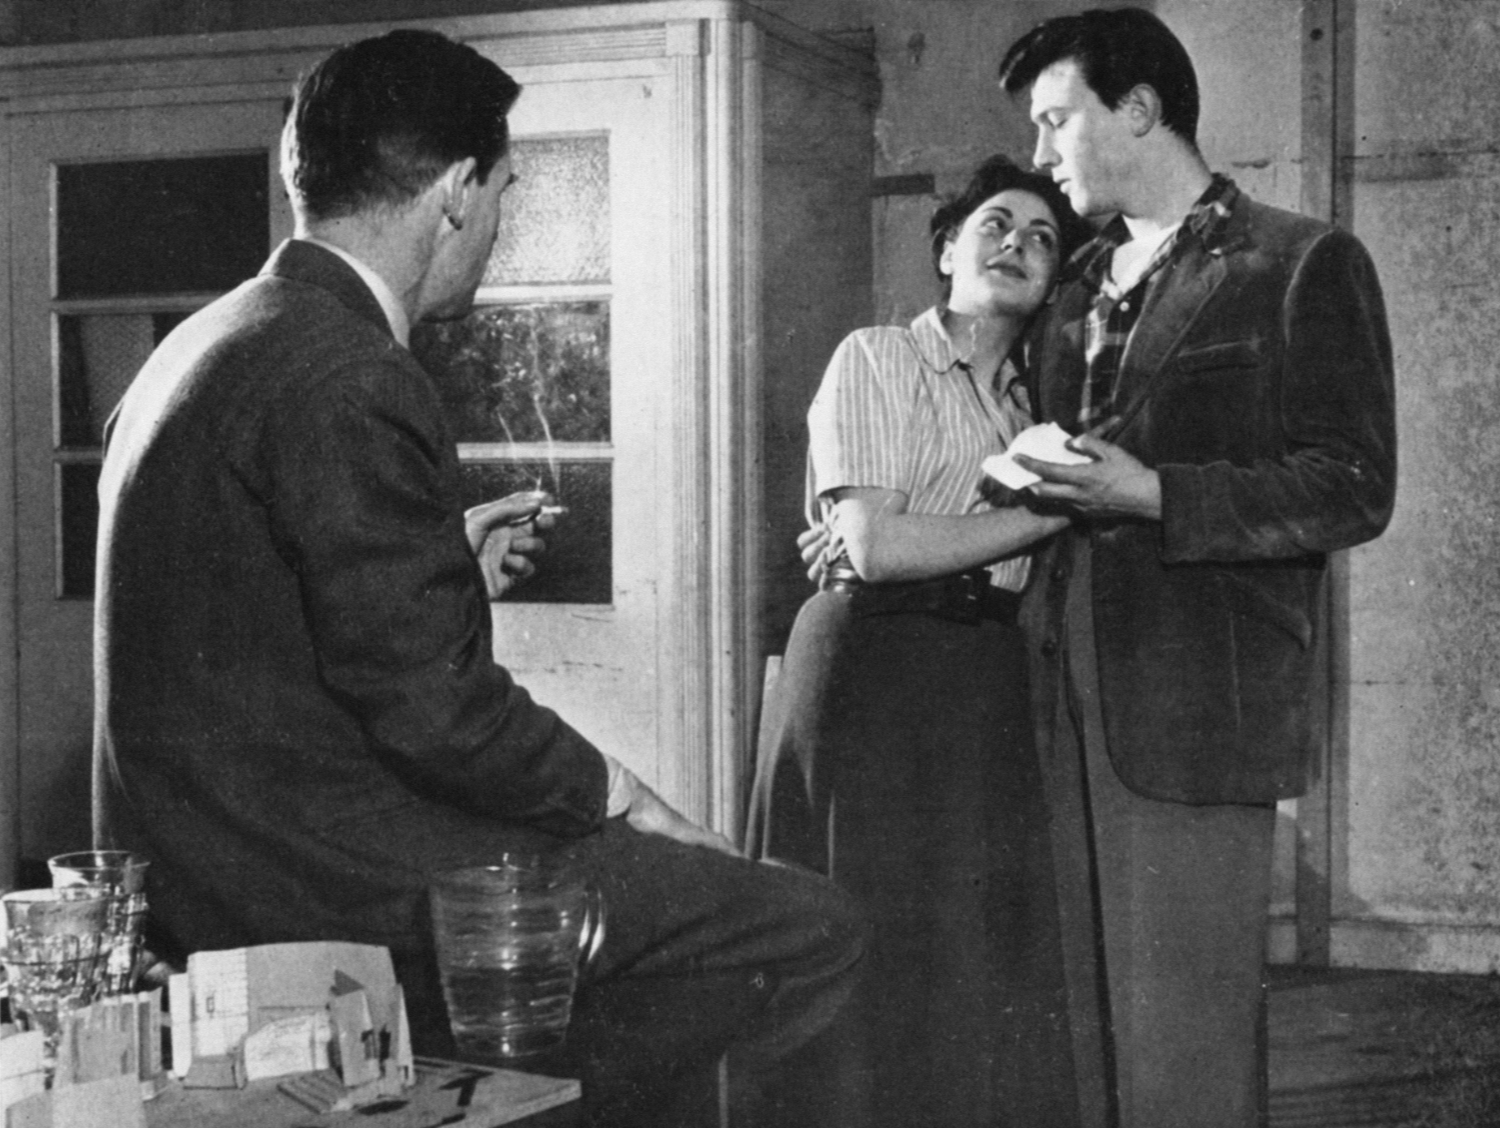 A man smoking a cigarette watches two actors rehearsing